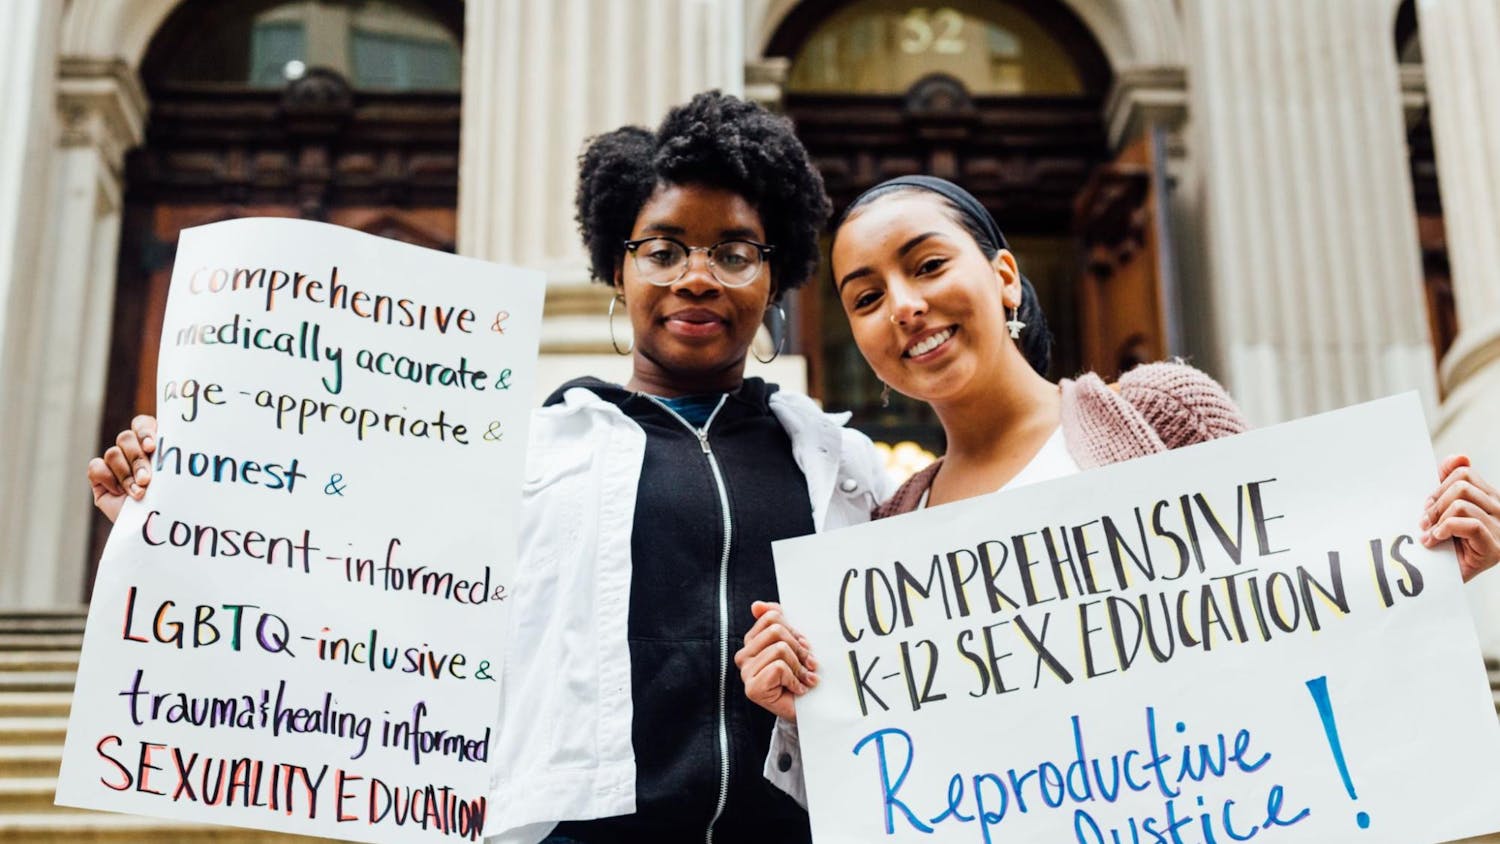 Students holding up signs to promote sex education | Source: NYCLU